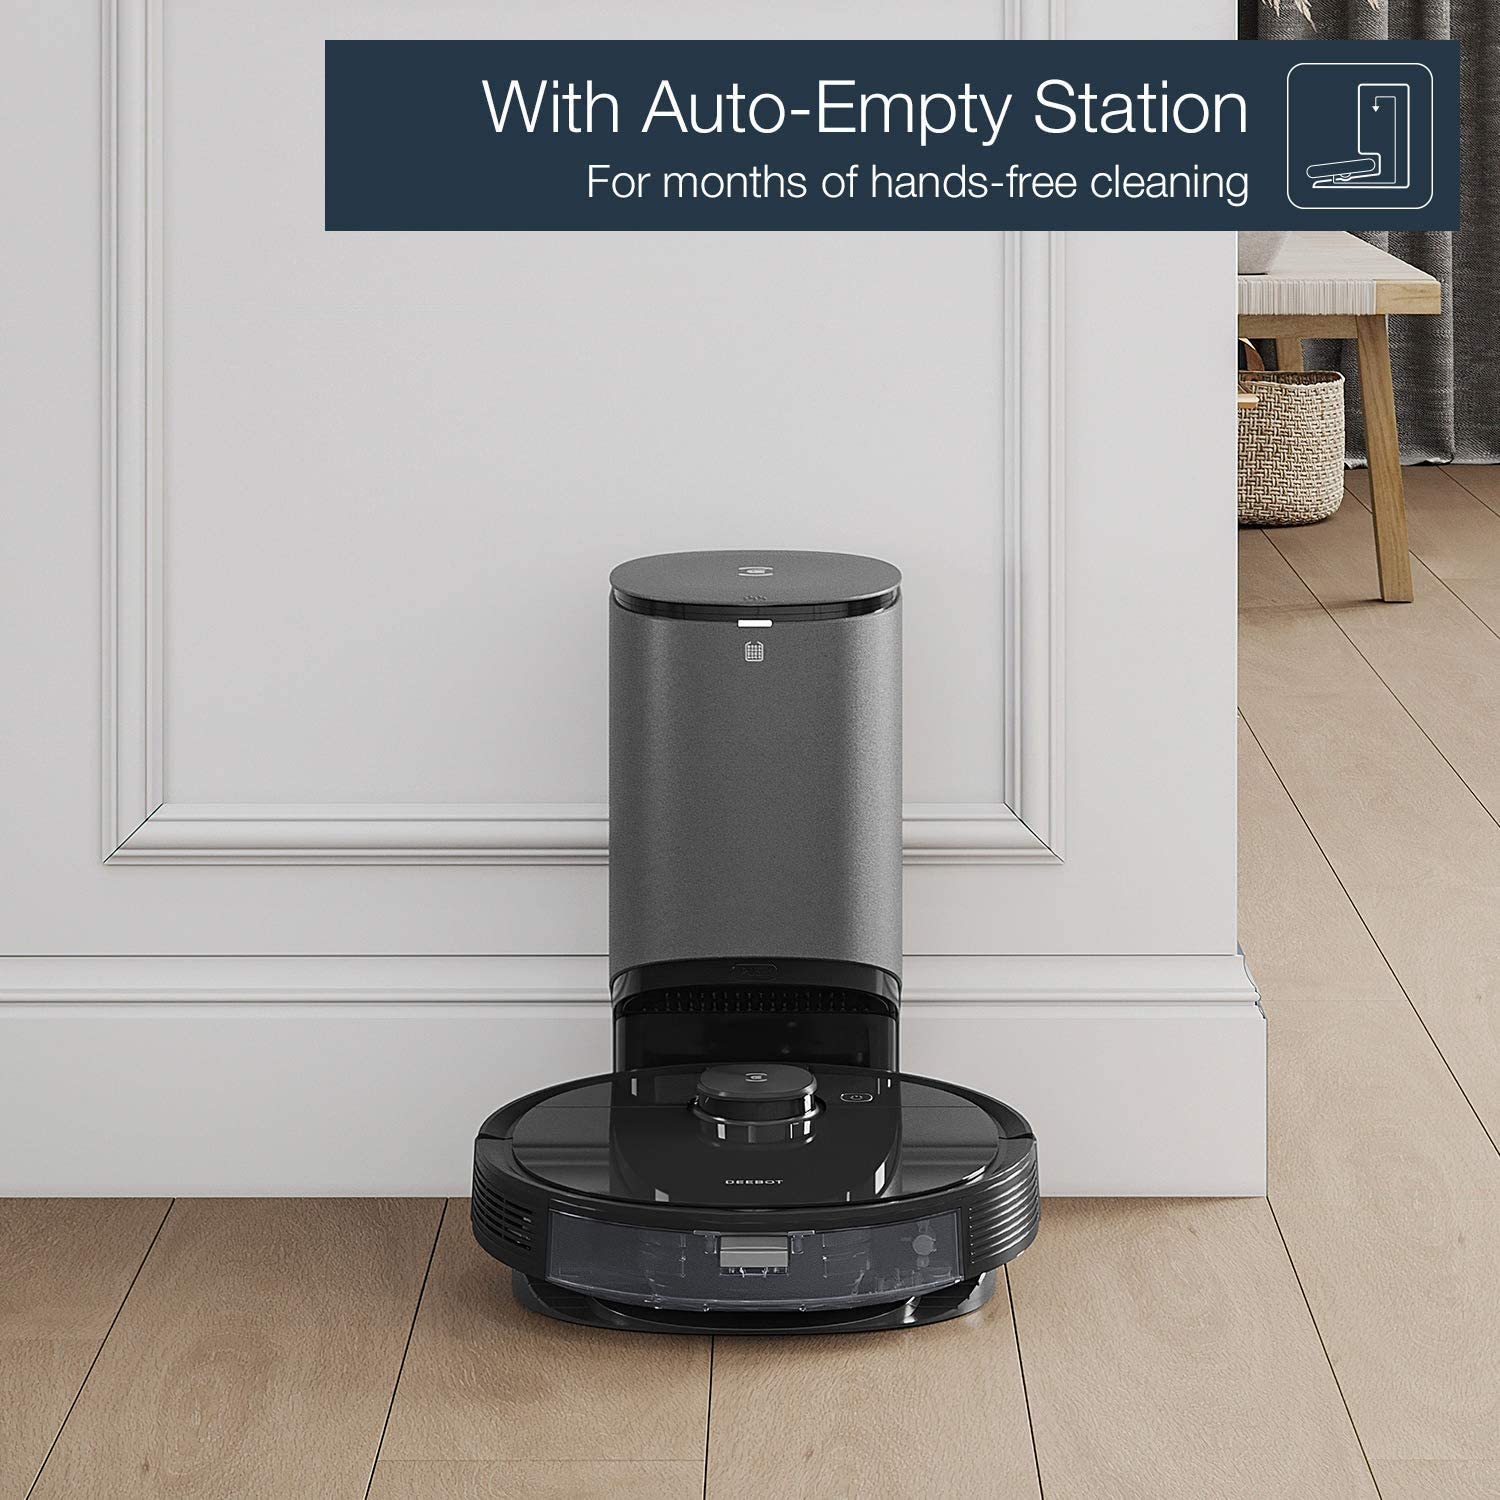 ECOVACS DEEBOT N8+ All-In-One Robot Vacuum Cleaner and Mop, Auto-Empty Station - image 2 of 5